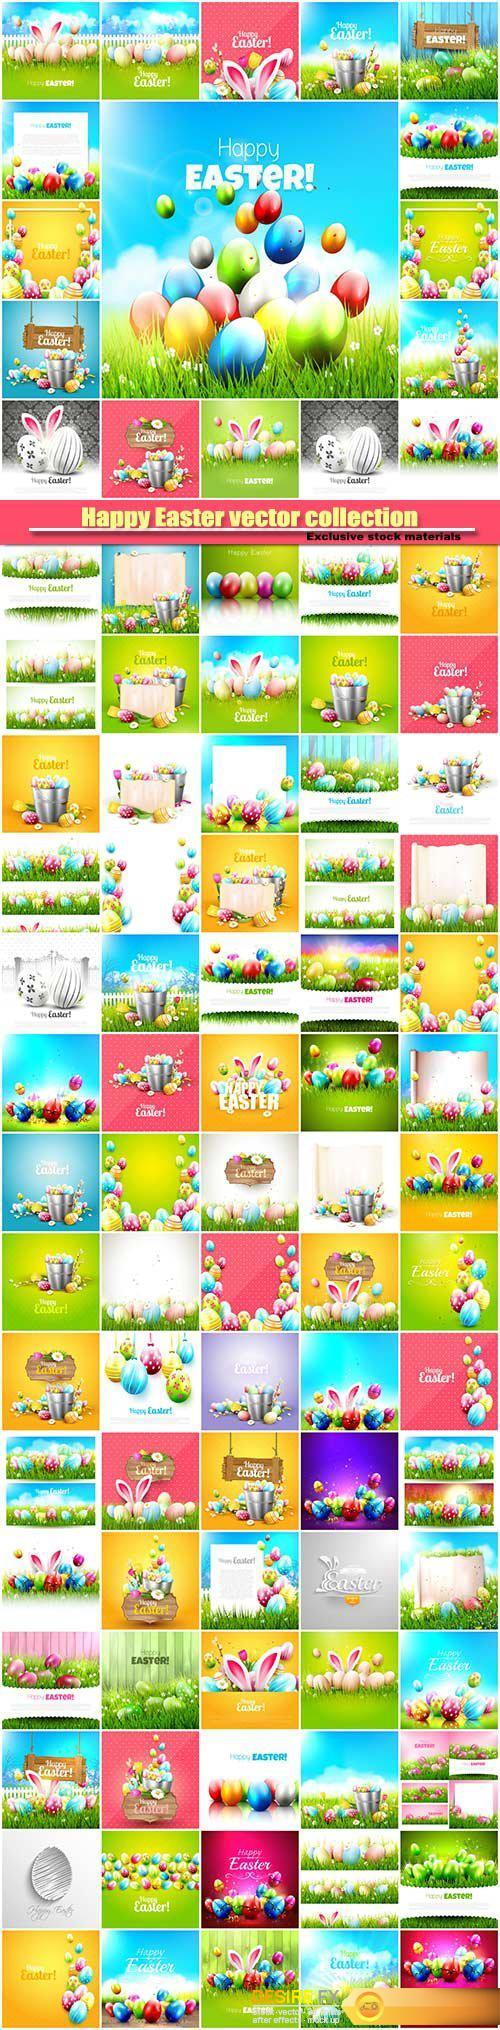 Happy Easter vector collection